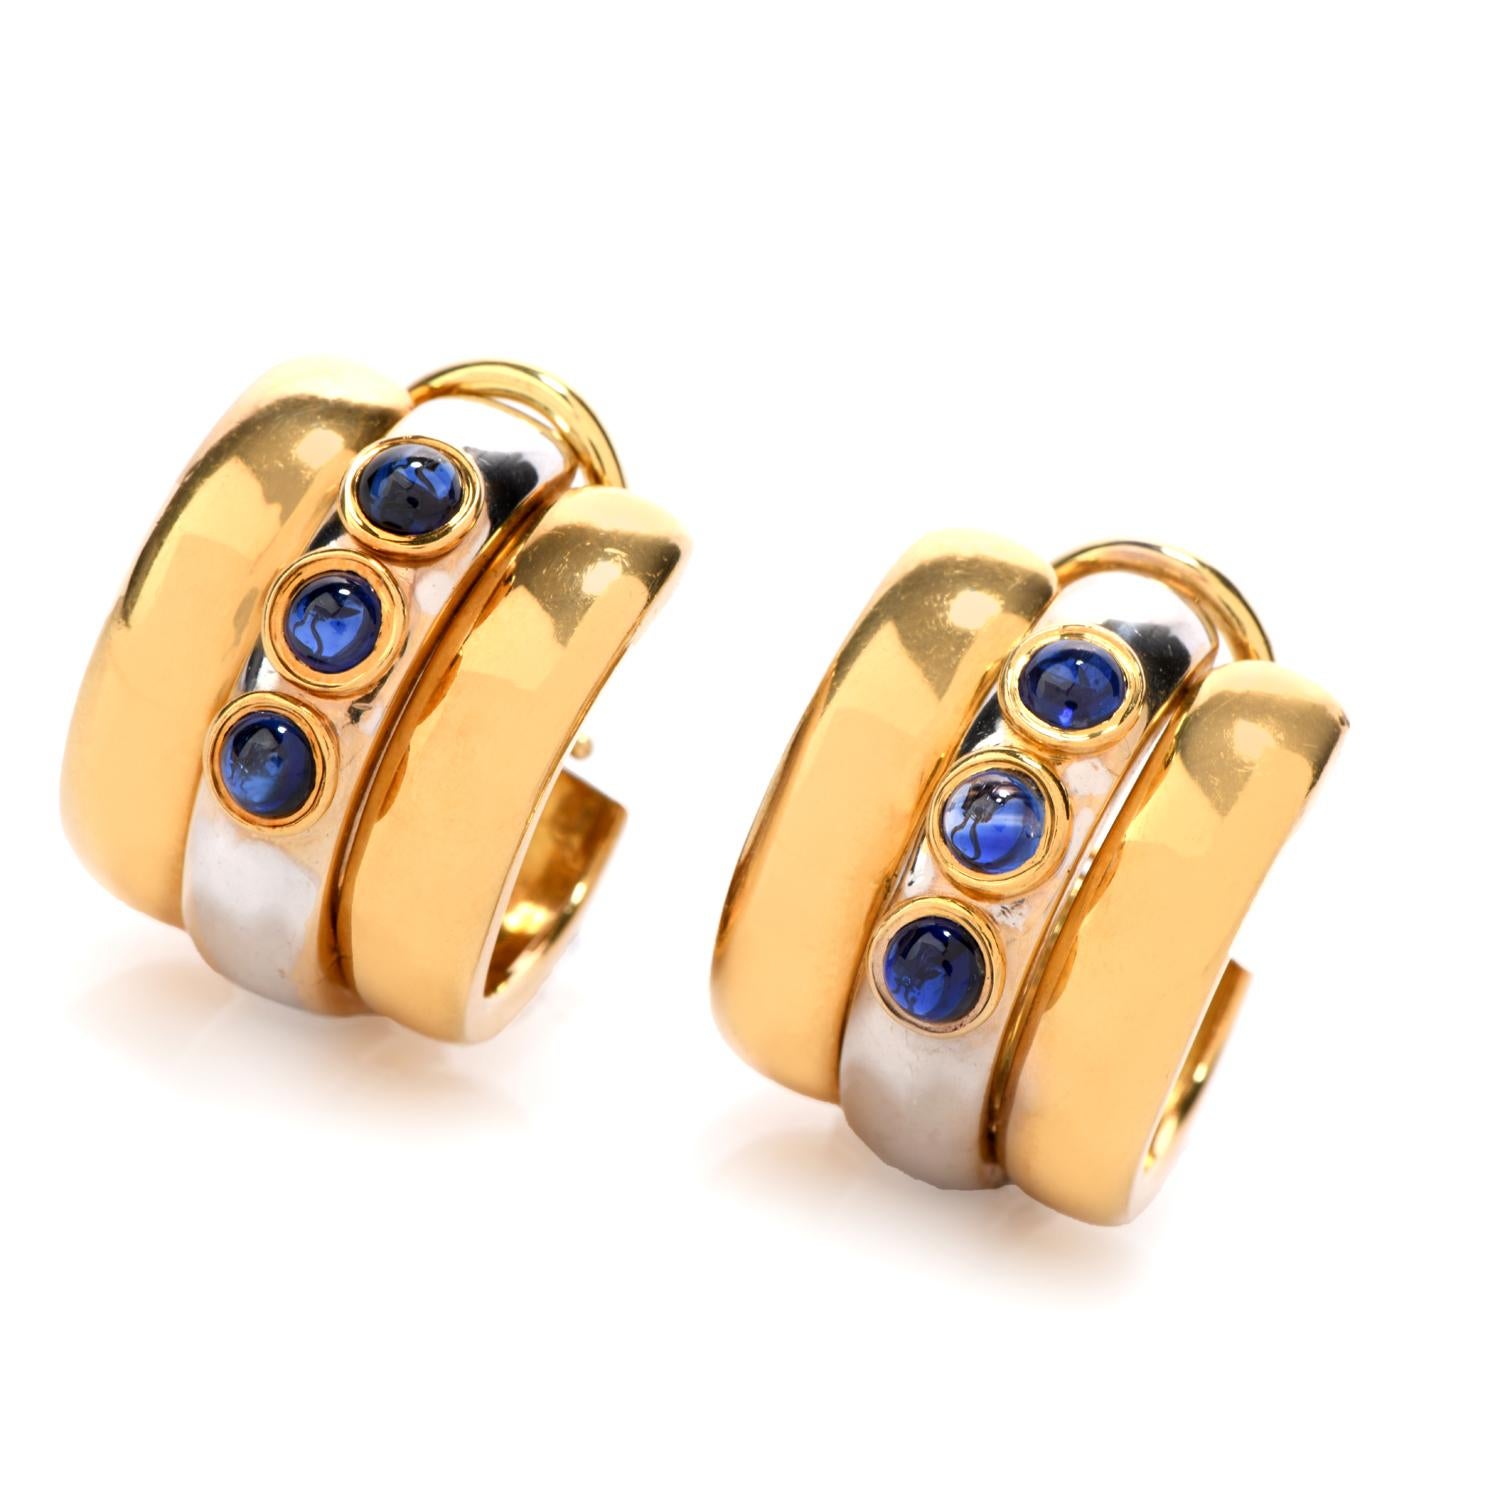 Add these simply precious Vintage 18K Gold Two Tone Cabochon Clip On Hoop Earrings to your collection!  These earrings

are crafted in 18 karat yellow and white gold, forming three rows.  Six genuine blue sapphires of round cabochon shape

and bezel